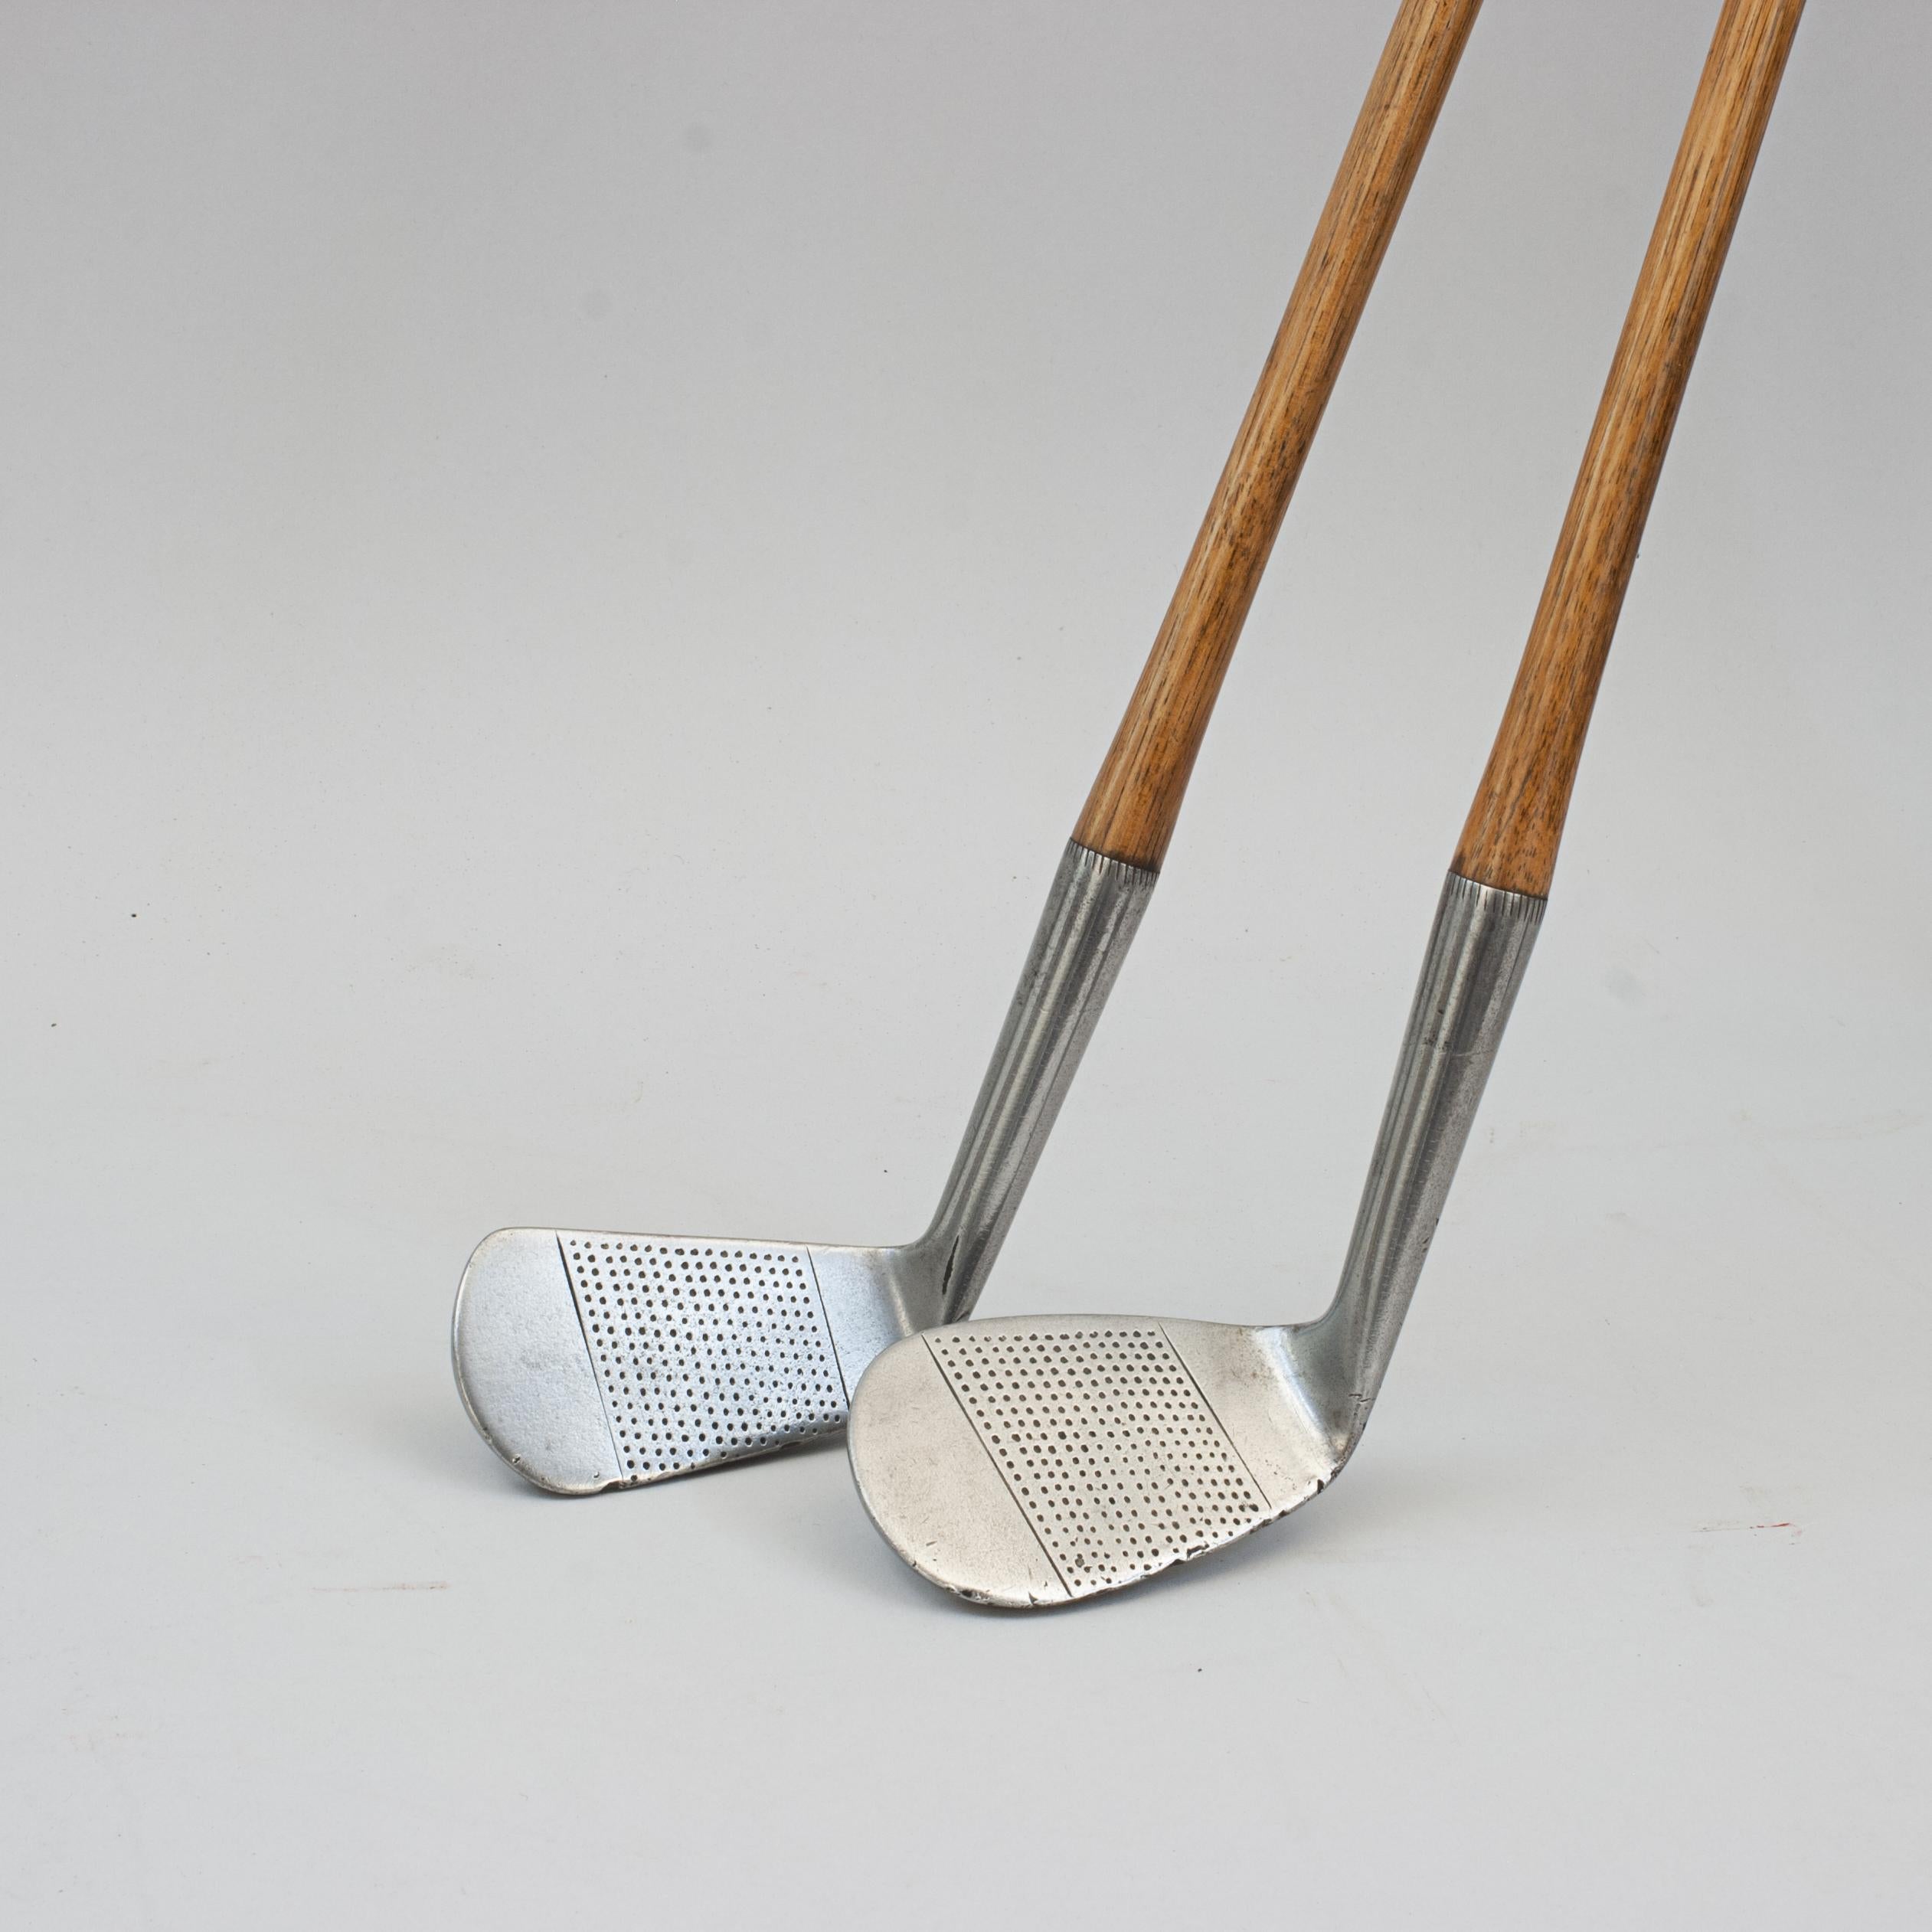 Pair of Golf Clubs by R. Forgan. Scotia, Mashie and Niblick 3